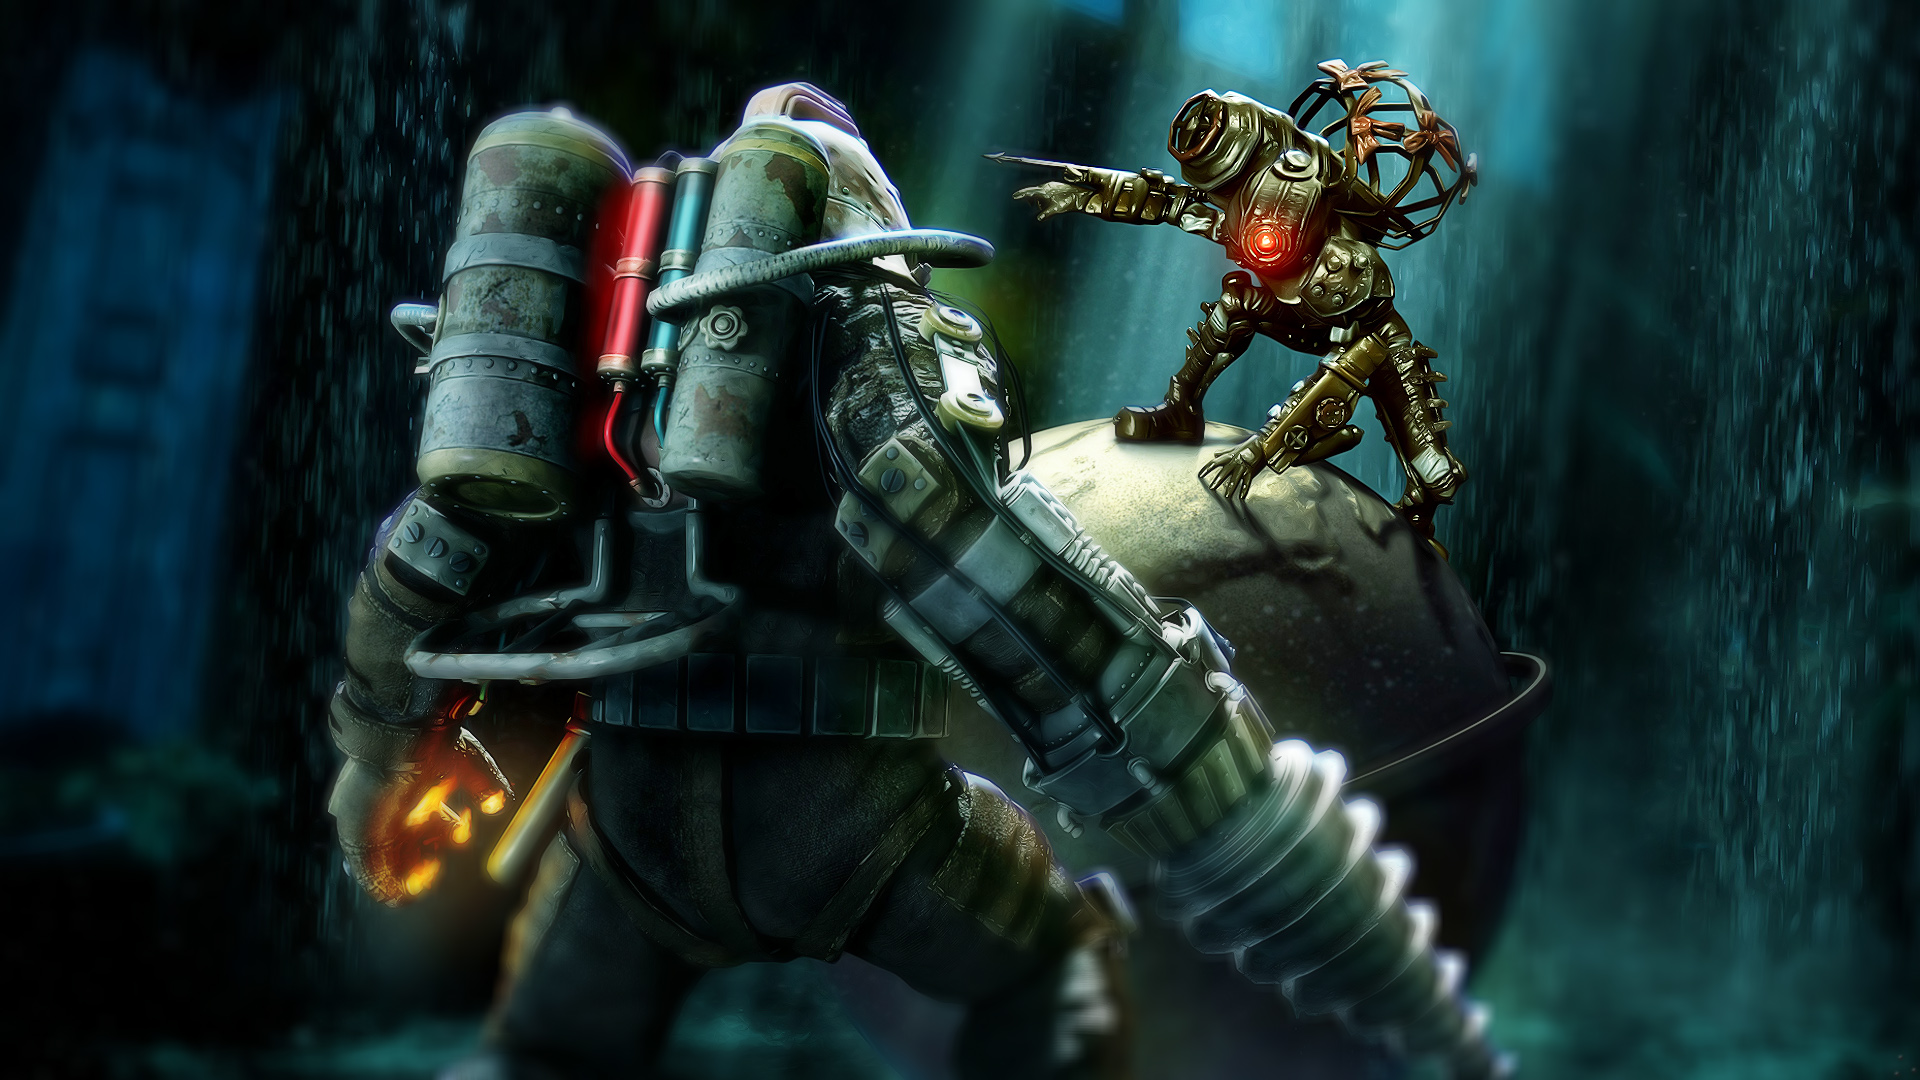 Bioshock 4K wallpapers for your desktop or mobile screen free and easy to  download